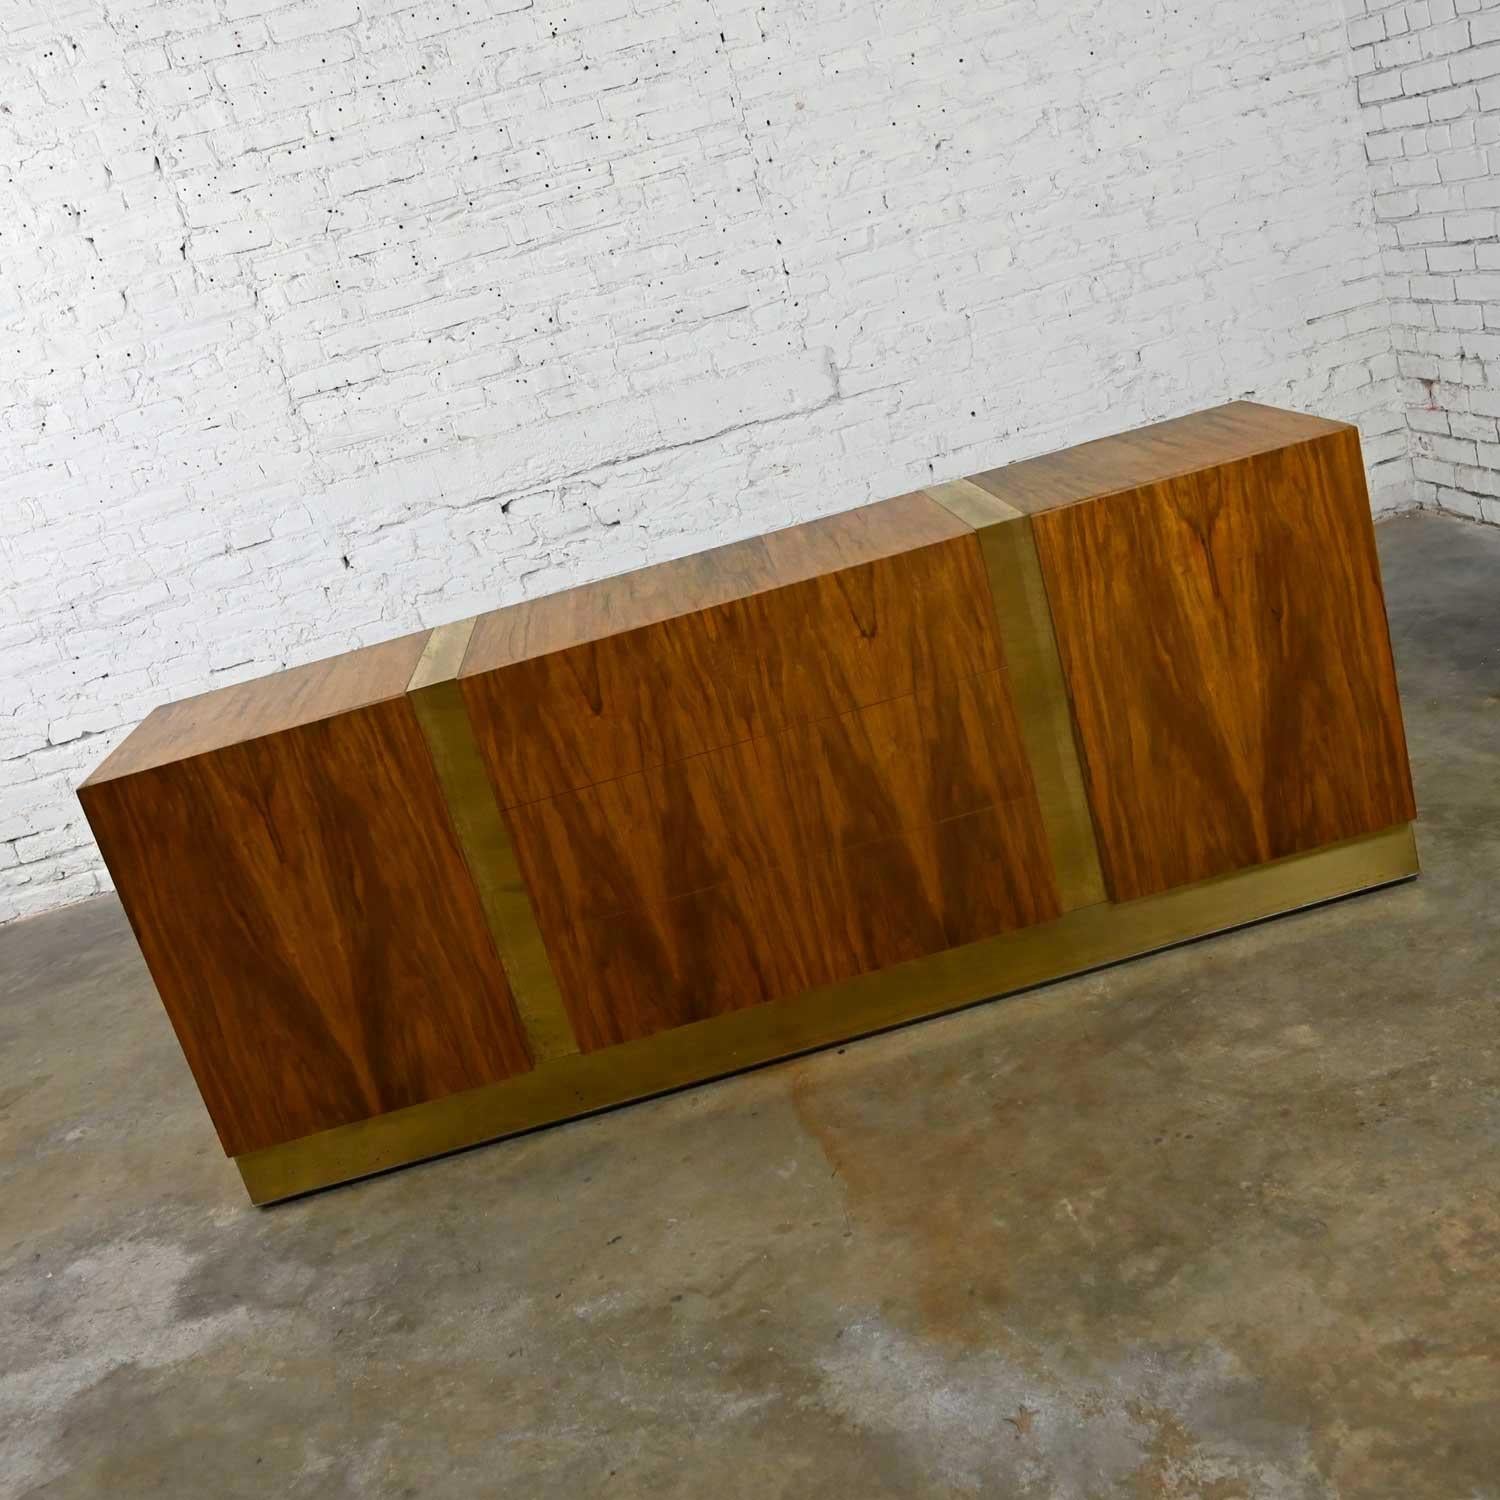 Stunning vintage modern dresser, credenza, or buffet by Milo Baughman for Thayer Coggin. Comprised of gorgeous rosewood veneer and brass plated steel bands. Three center drawers and two side doors with three ebonized pull-out shelves each side.